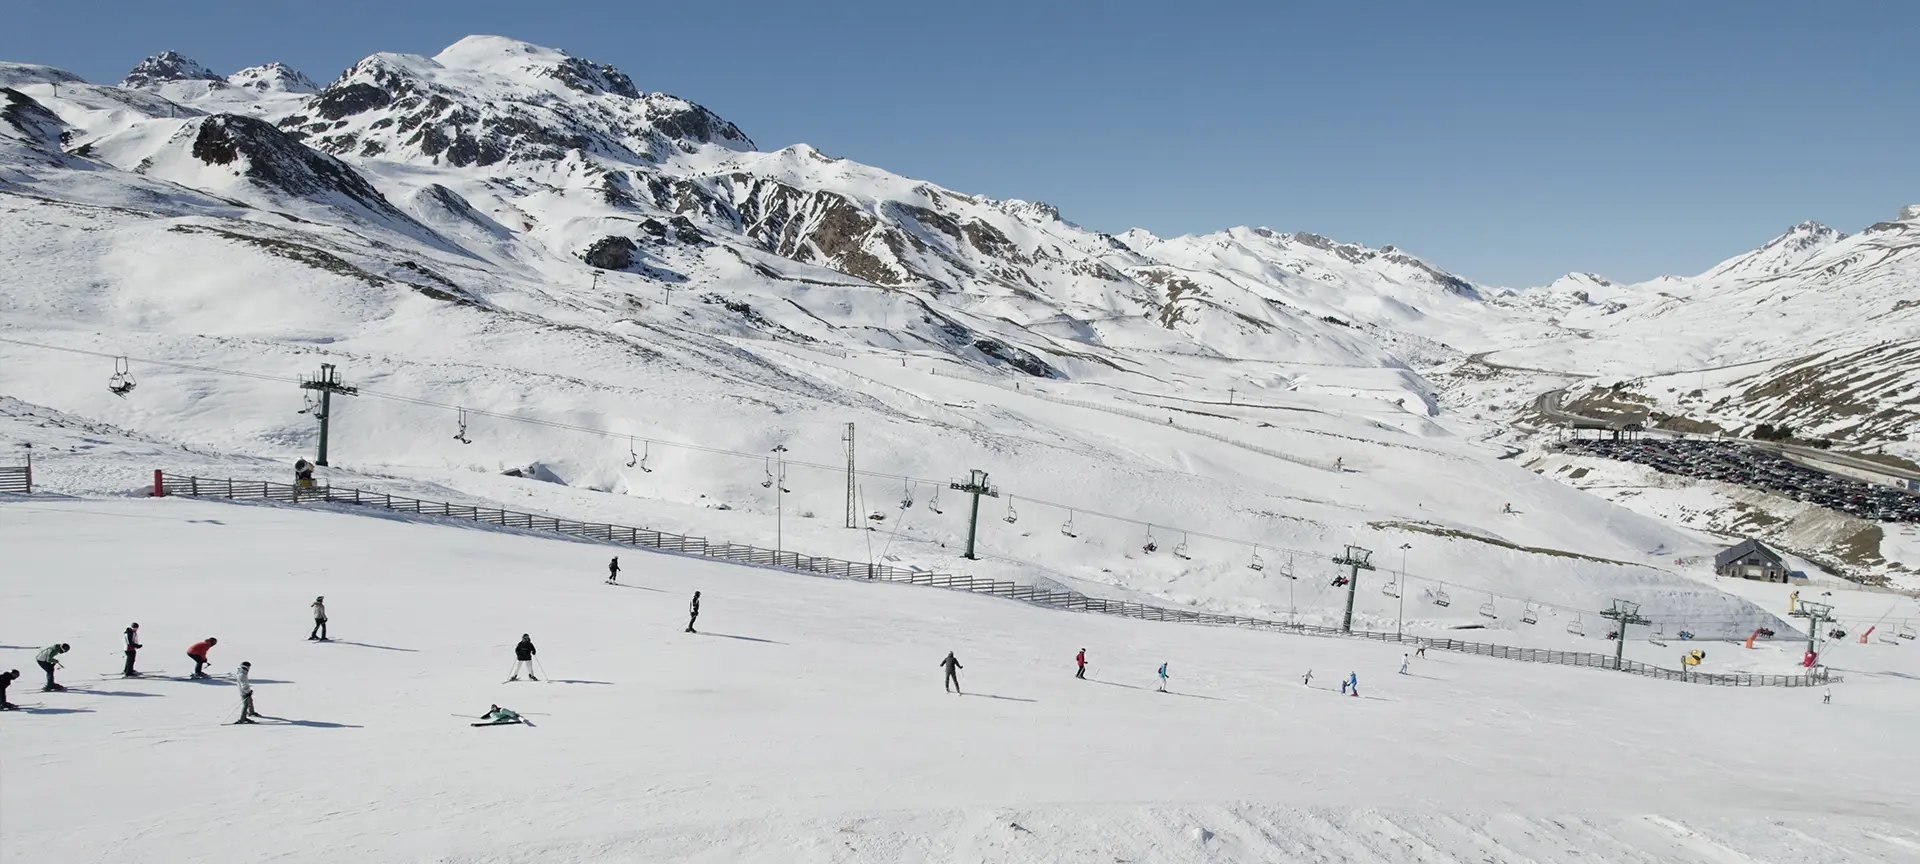 Marina Port Vell – After-ski locations in the Pyrenees – ski in the Pyrenees